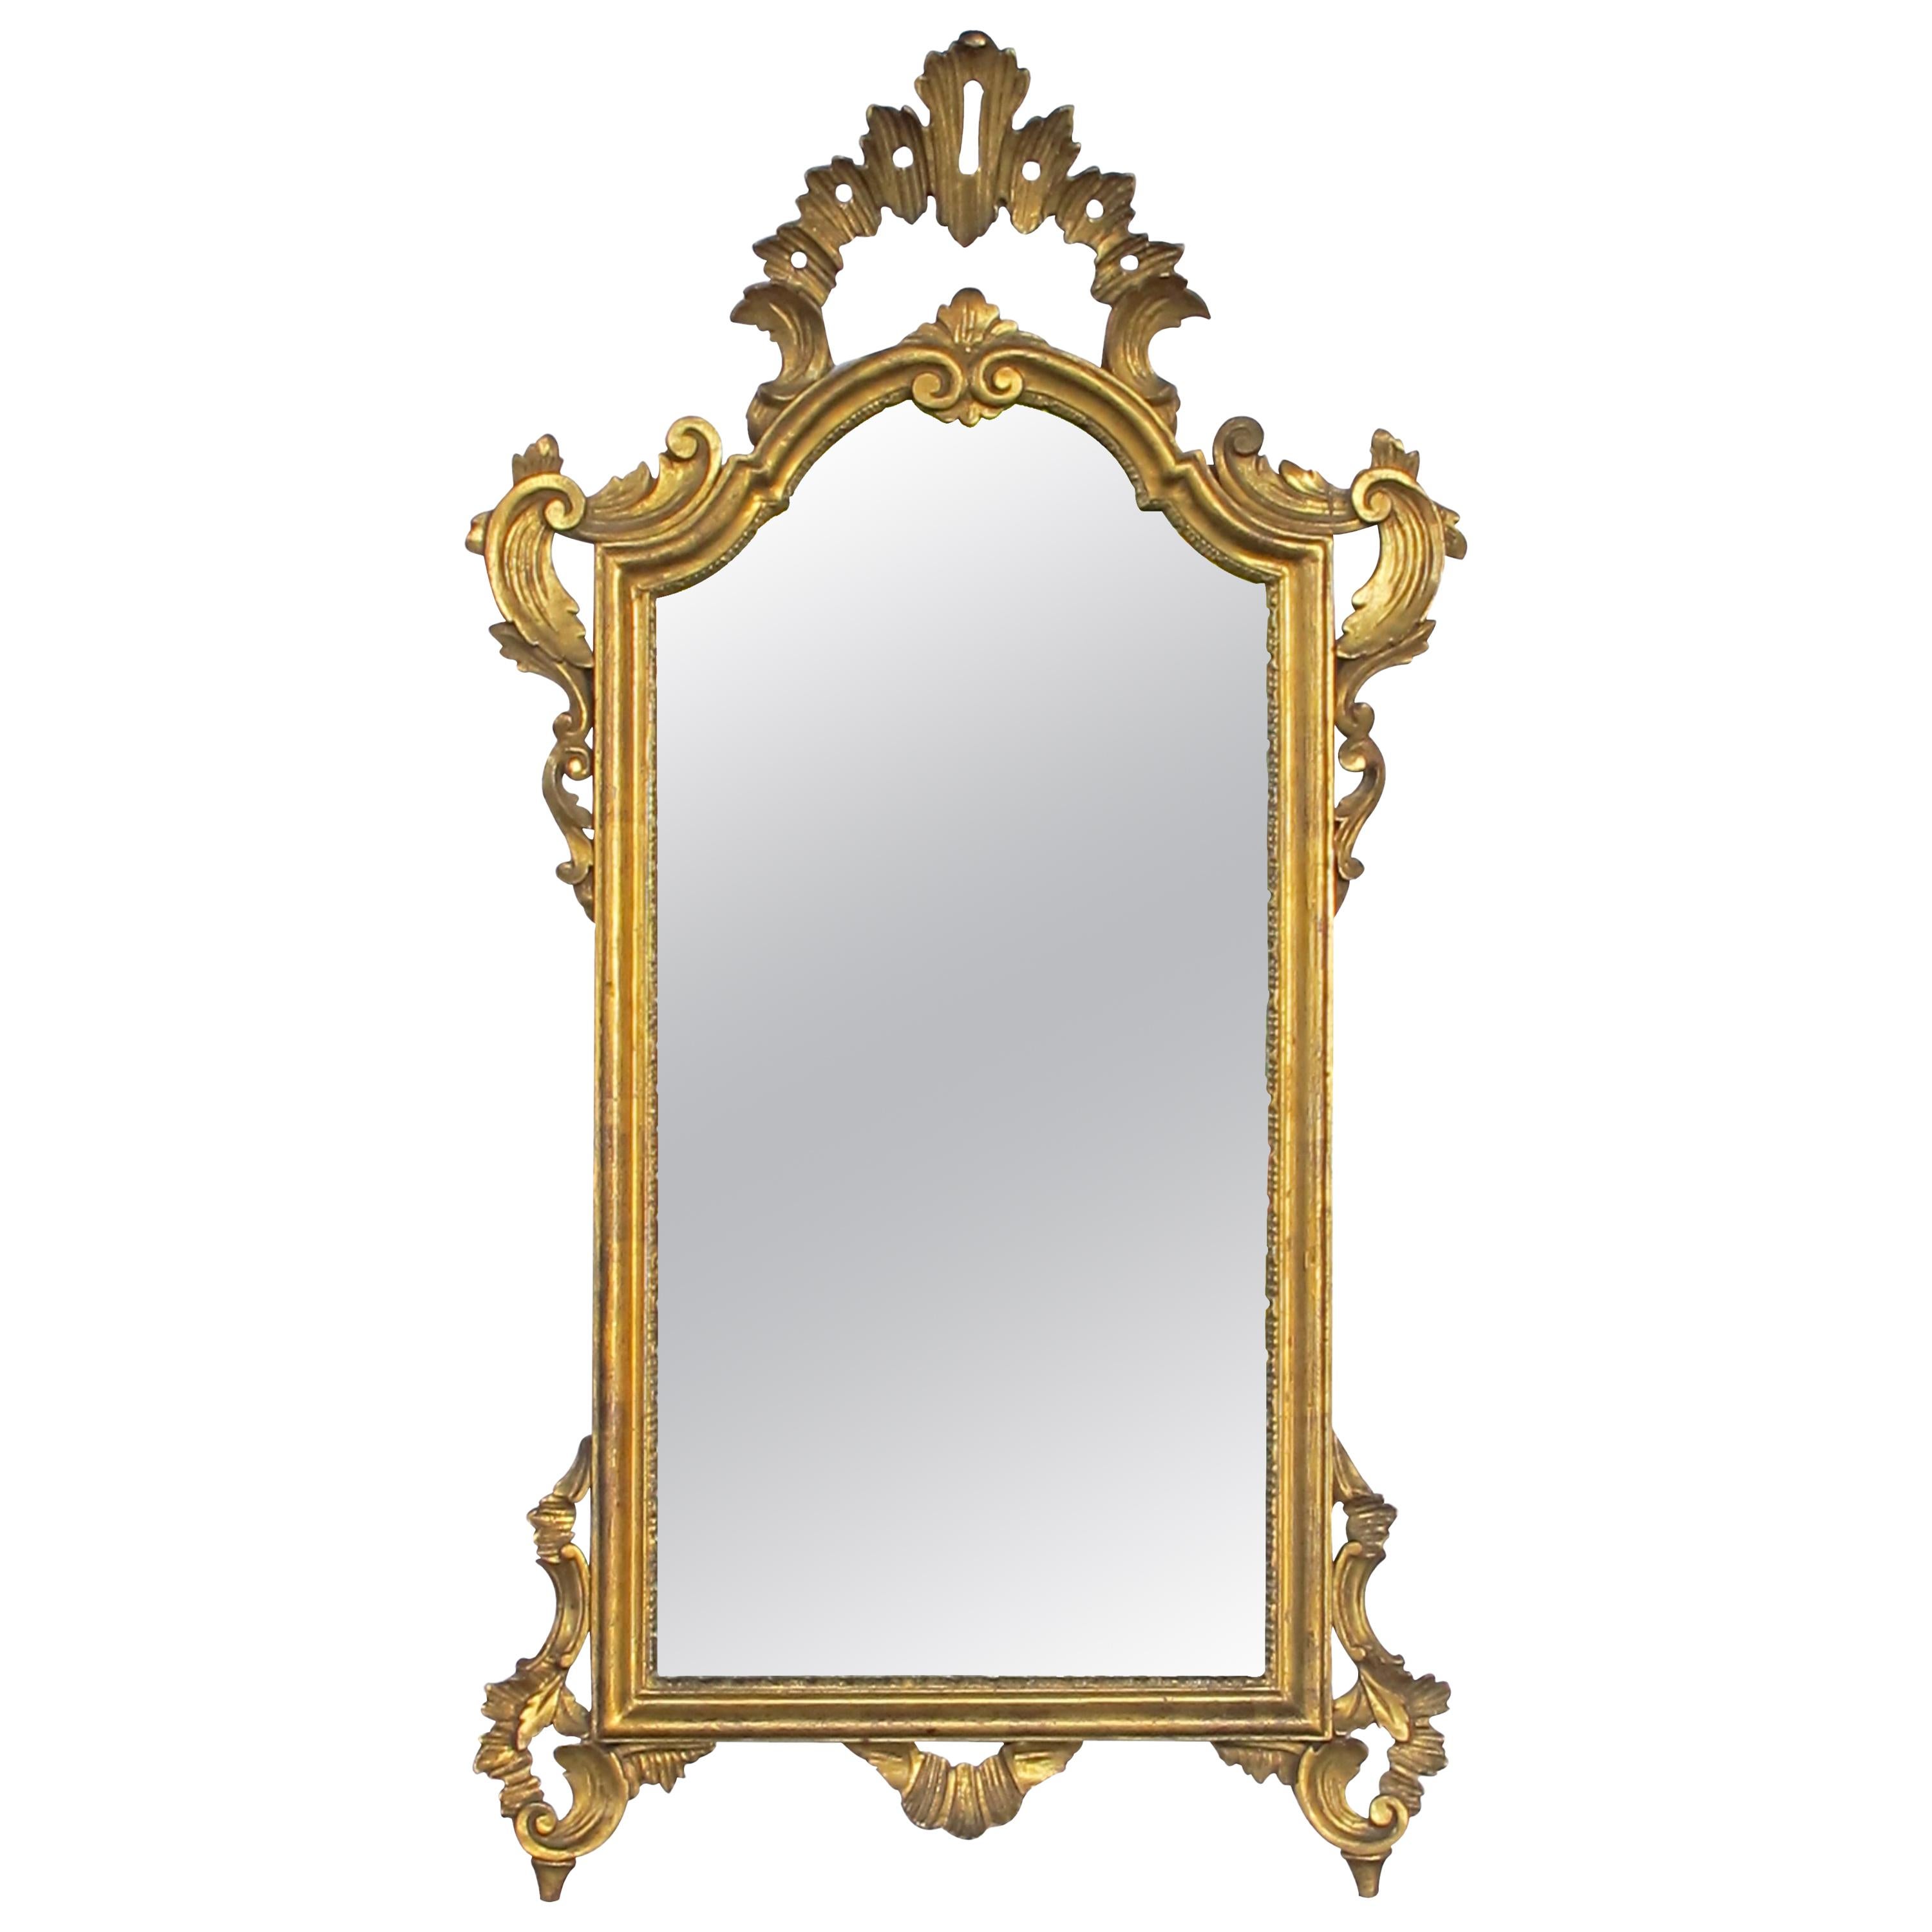 Shapely Italian Rococo Style Carved Giltwood Mirror with Openwork Rocaille Crest For Sale